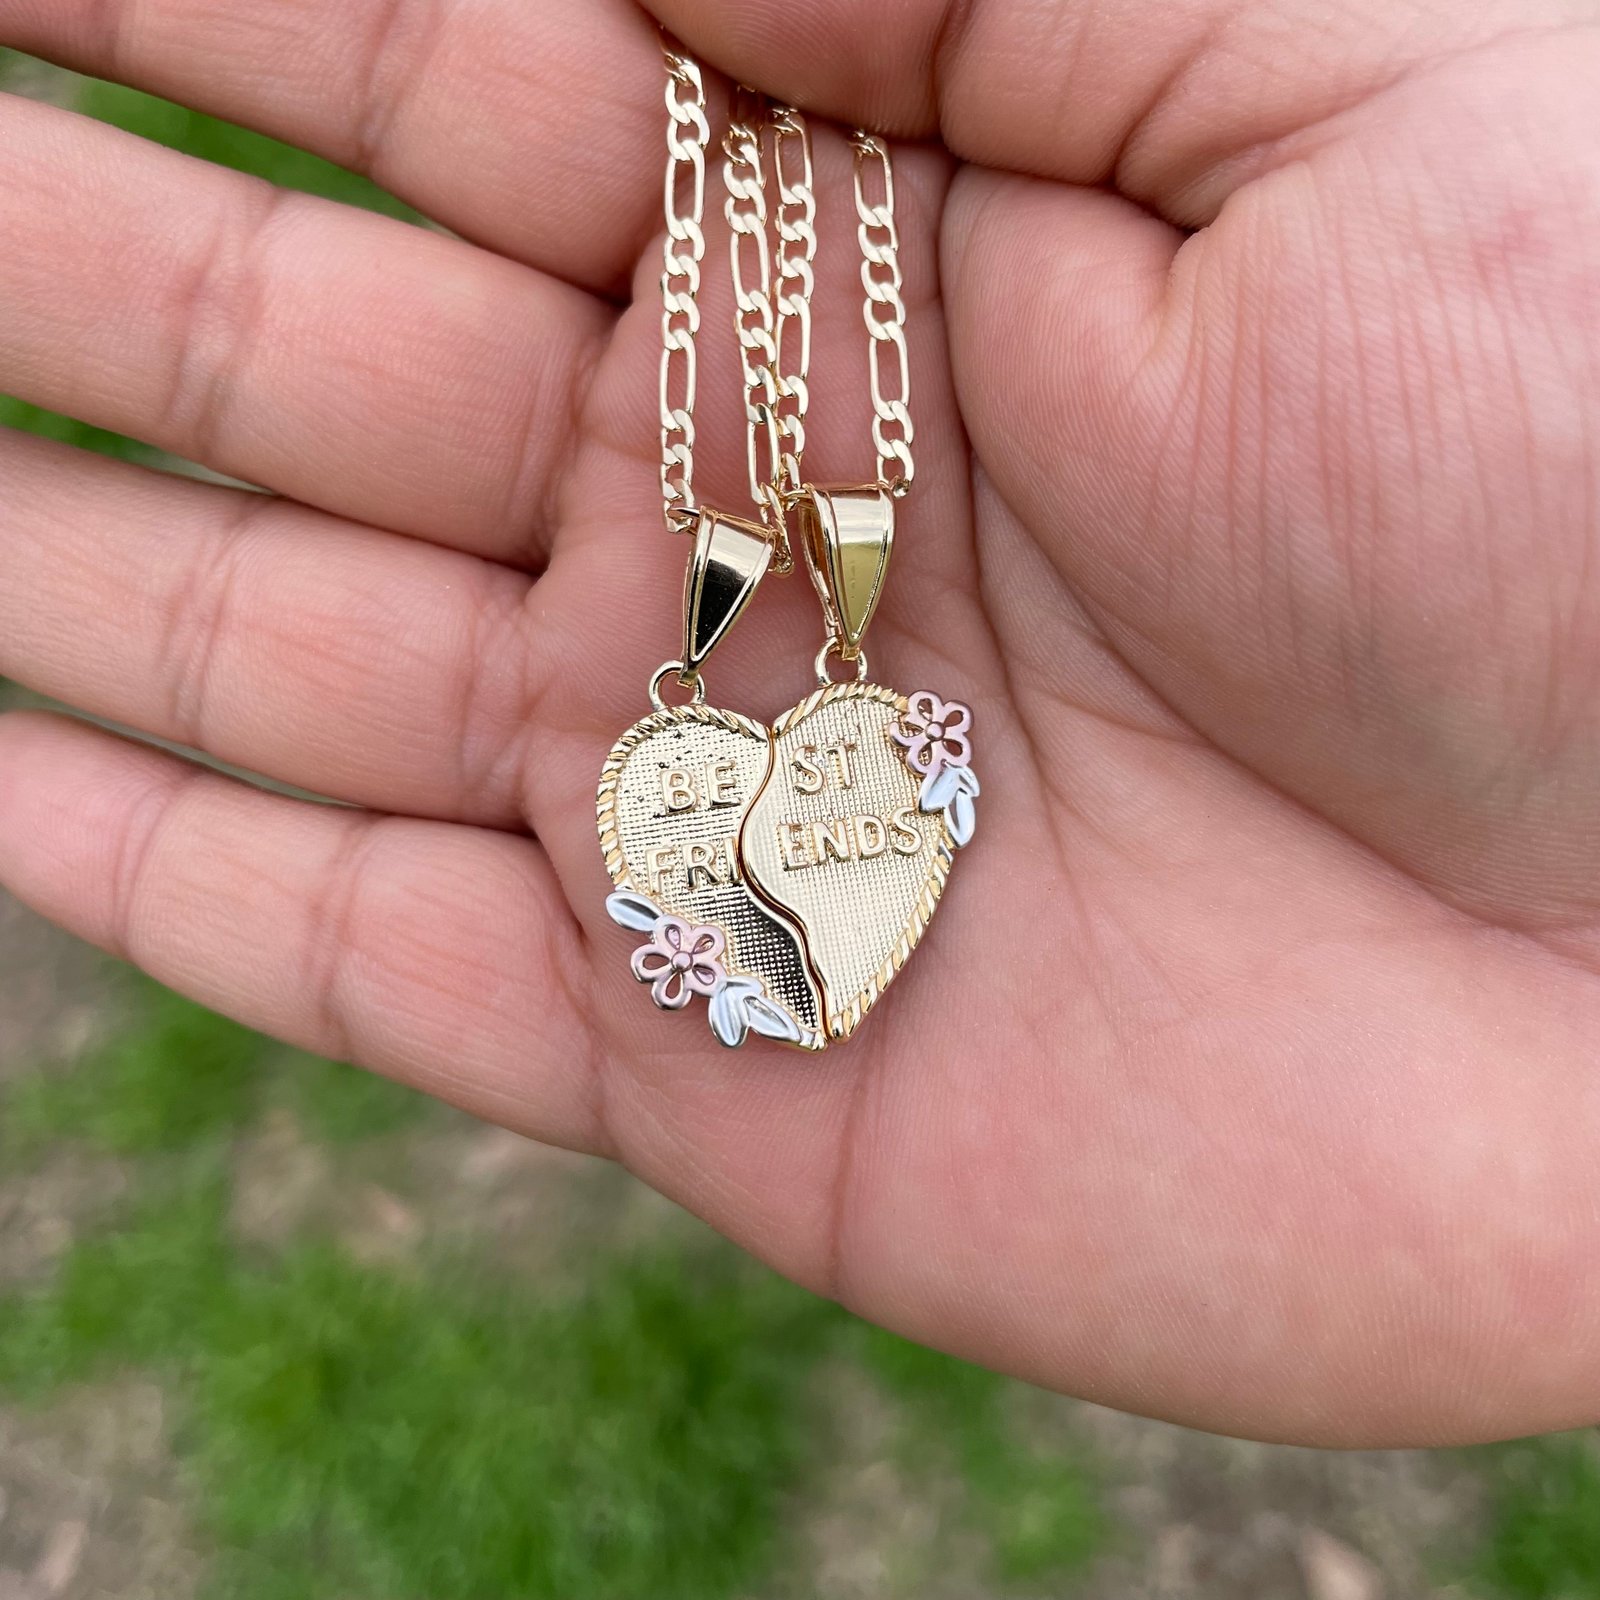 Personalized Best Friends Necklaces in Silver - MYKA